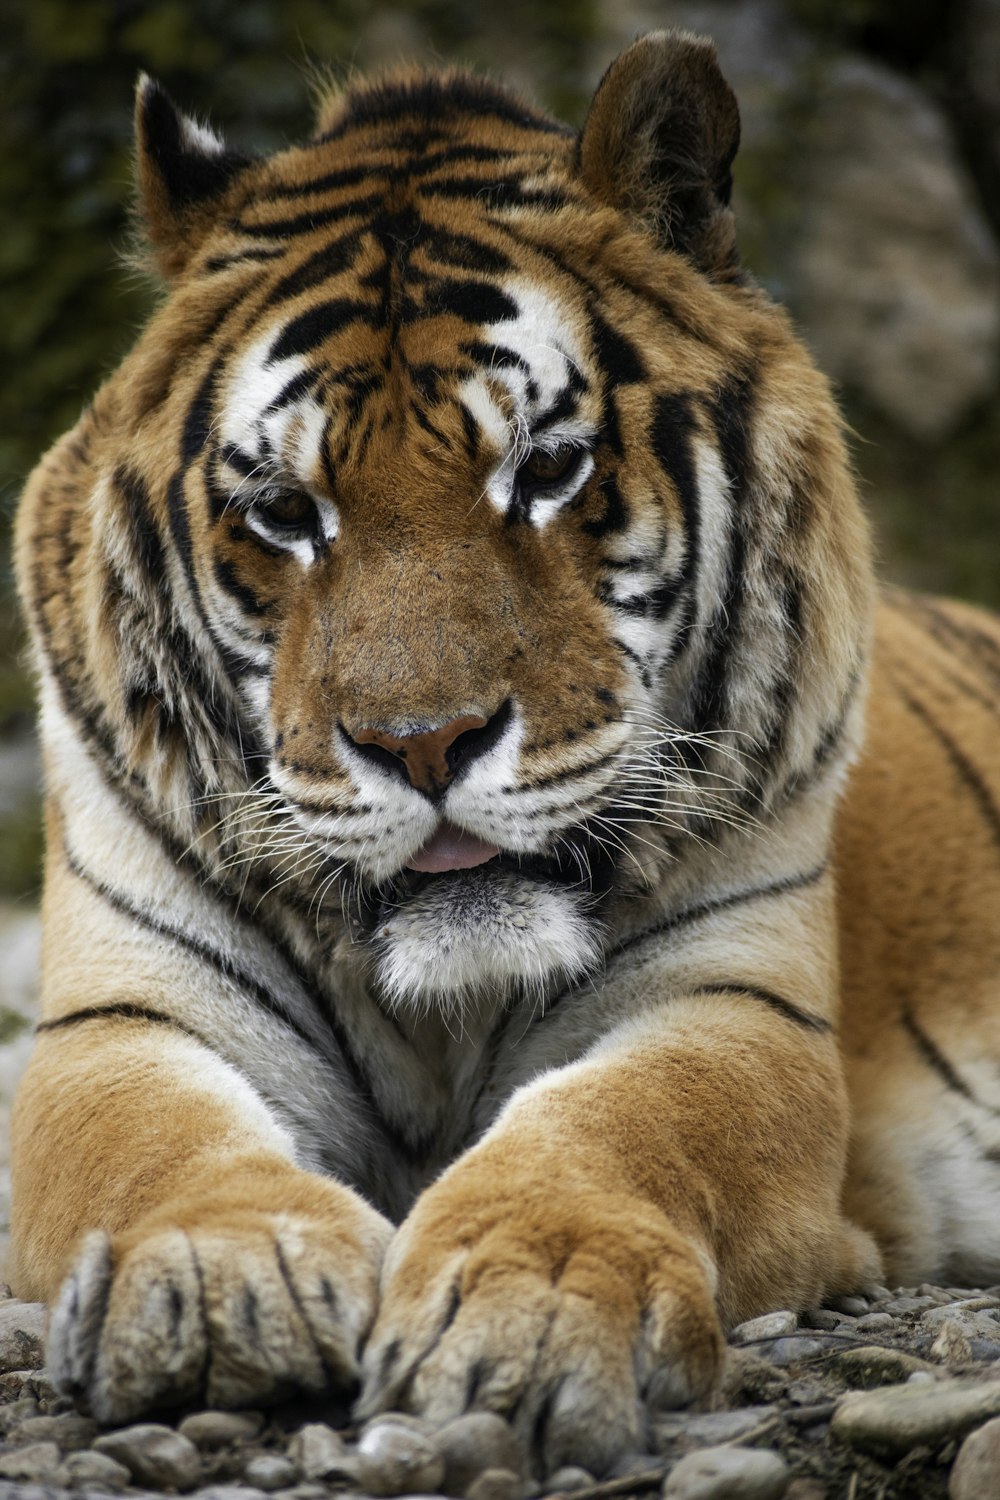 a close up of a tiger laying on a rock